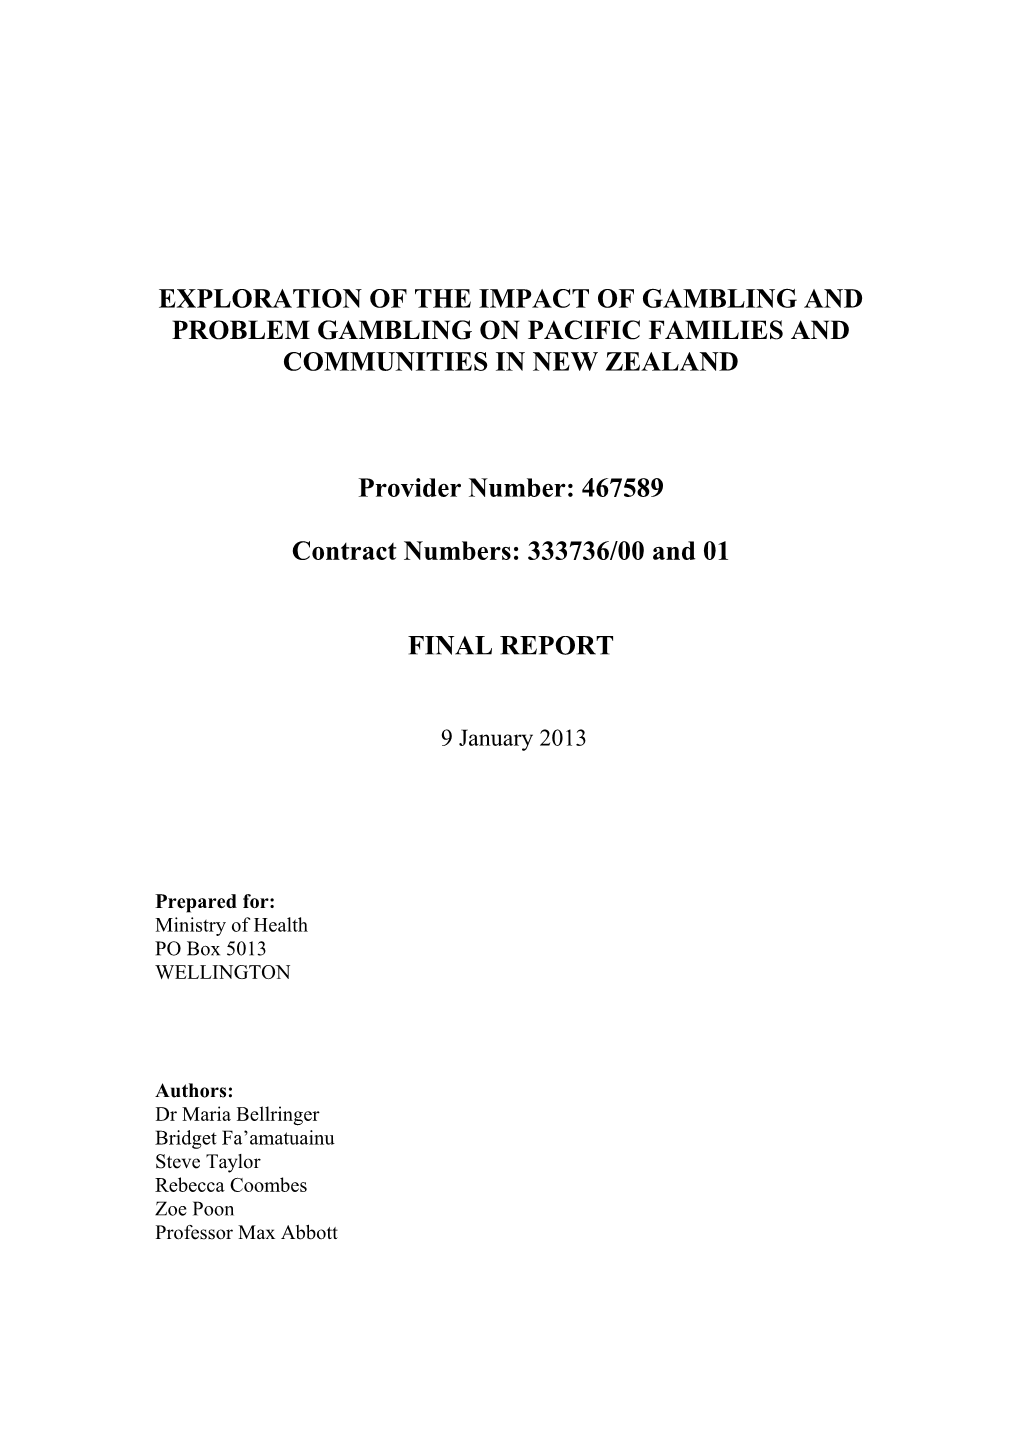 Exploration of the Impact of Gambling and Problem Gambling on Pacific Families and Communities